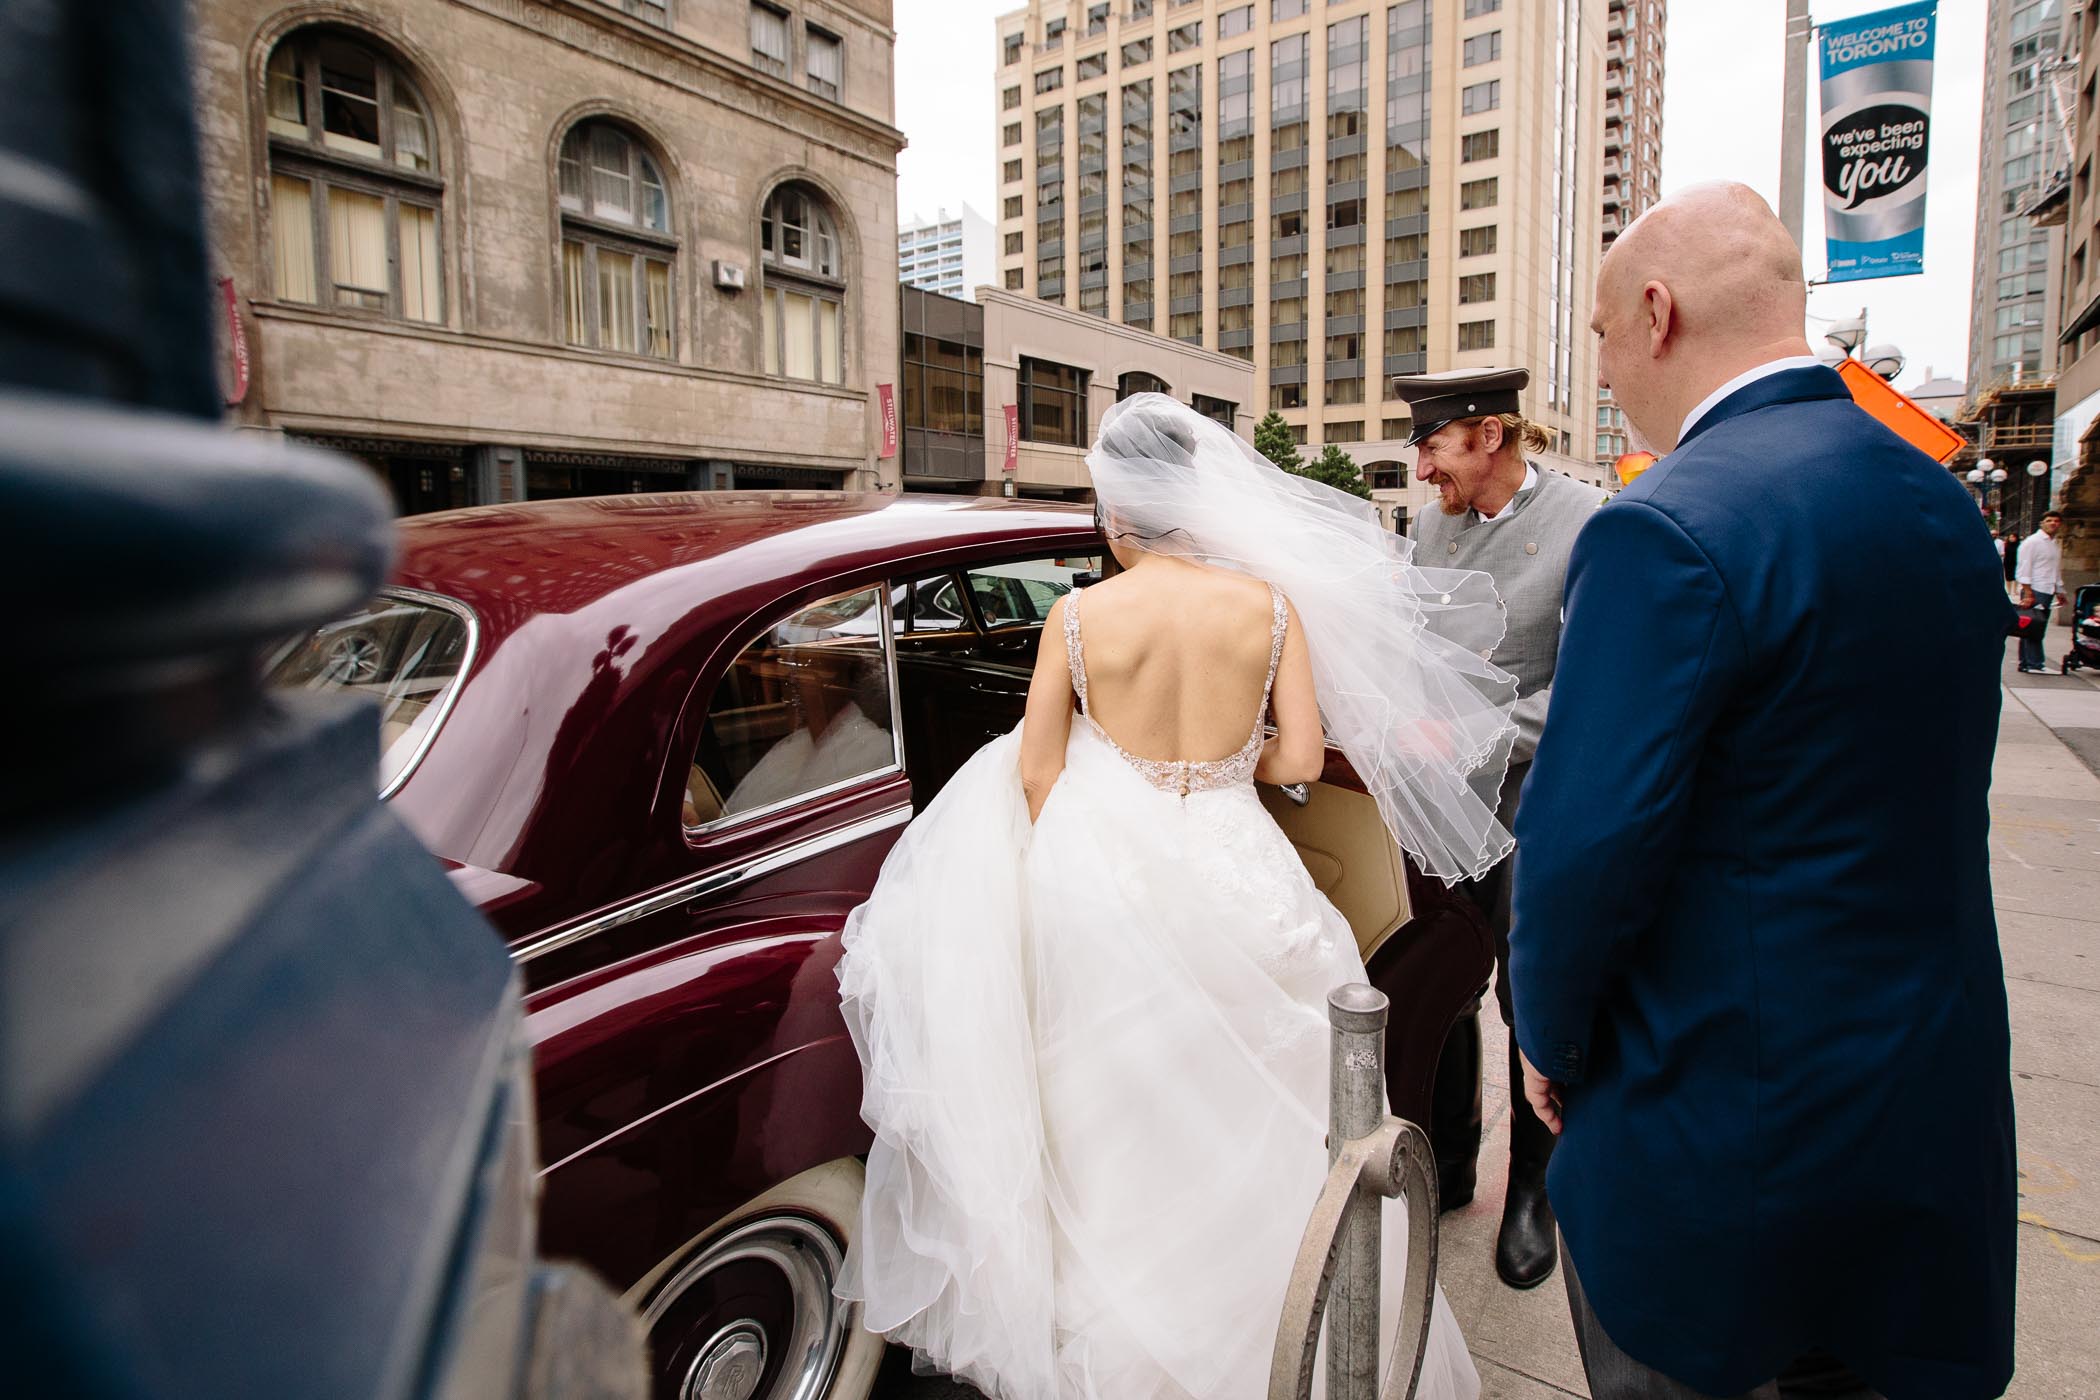 The bride entering a red Rolls Royce limo after wedding ceremony at Church of the Redeemer in Toronto.